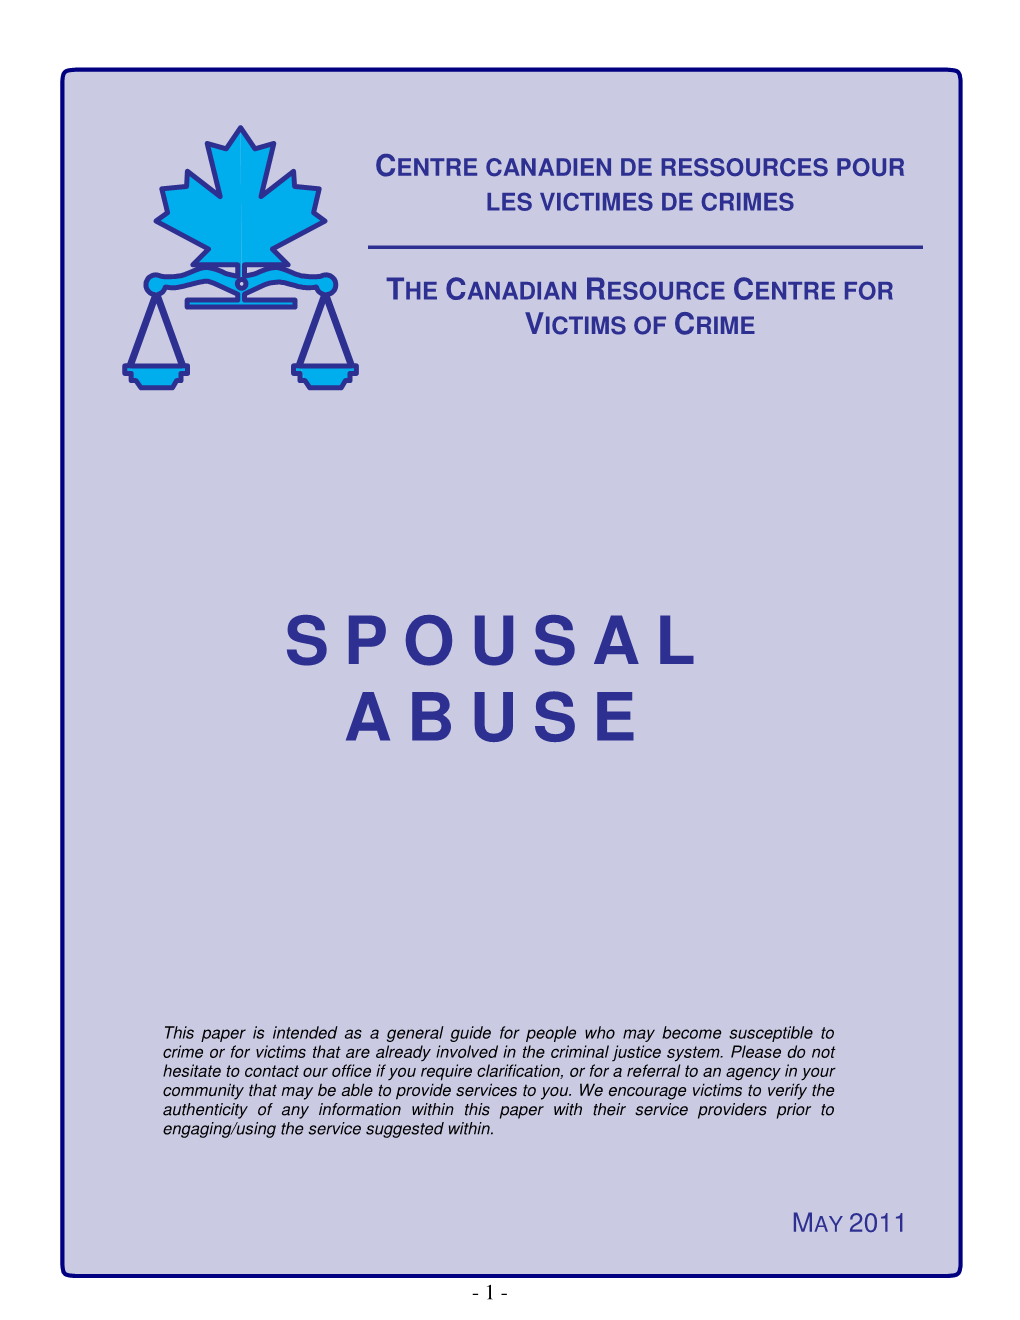 Spousal Abuse Is a Problem That Is Entrenched in Many Societies Around the World and Canada Is No Exception